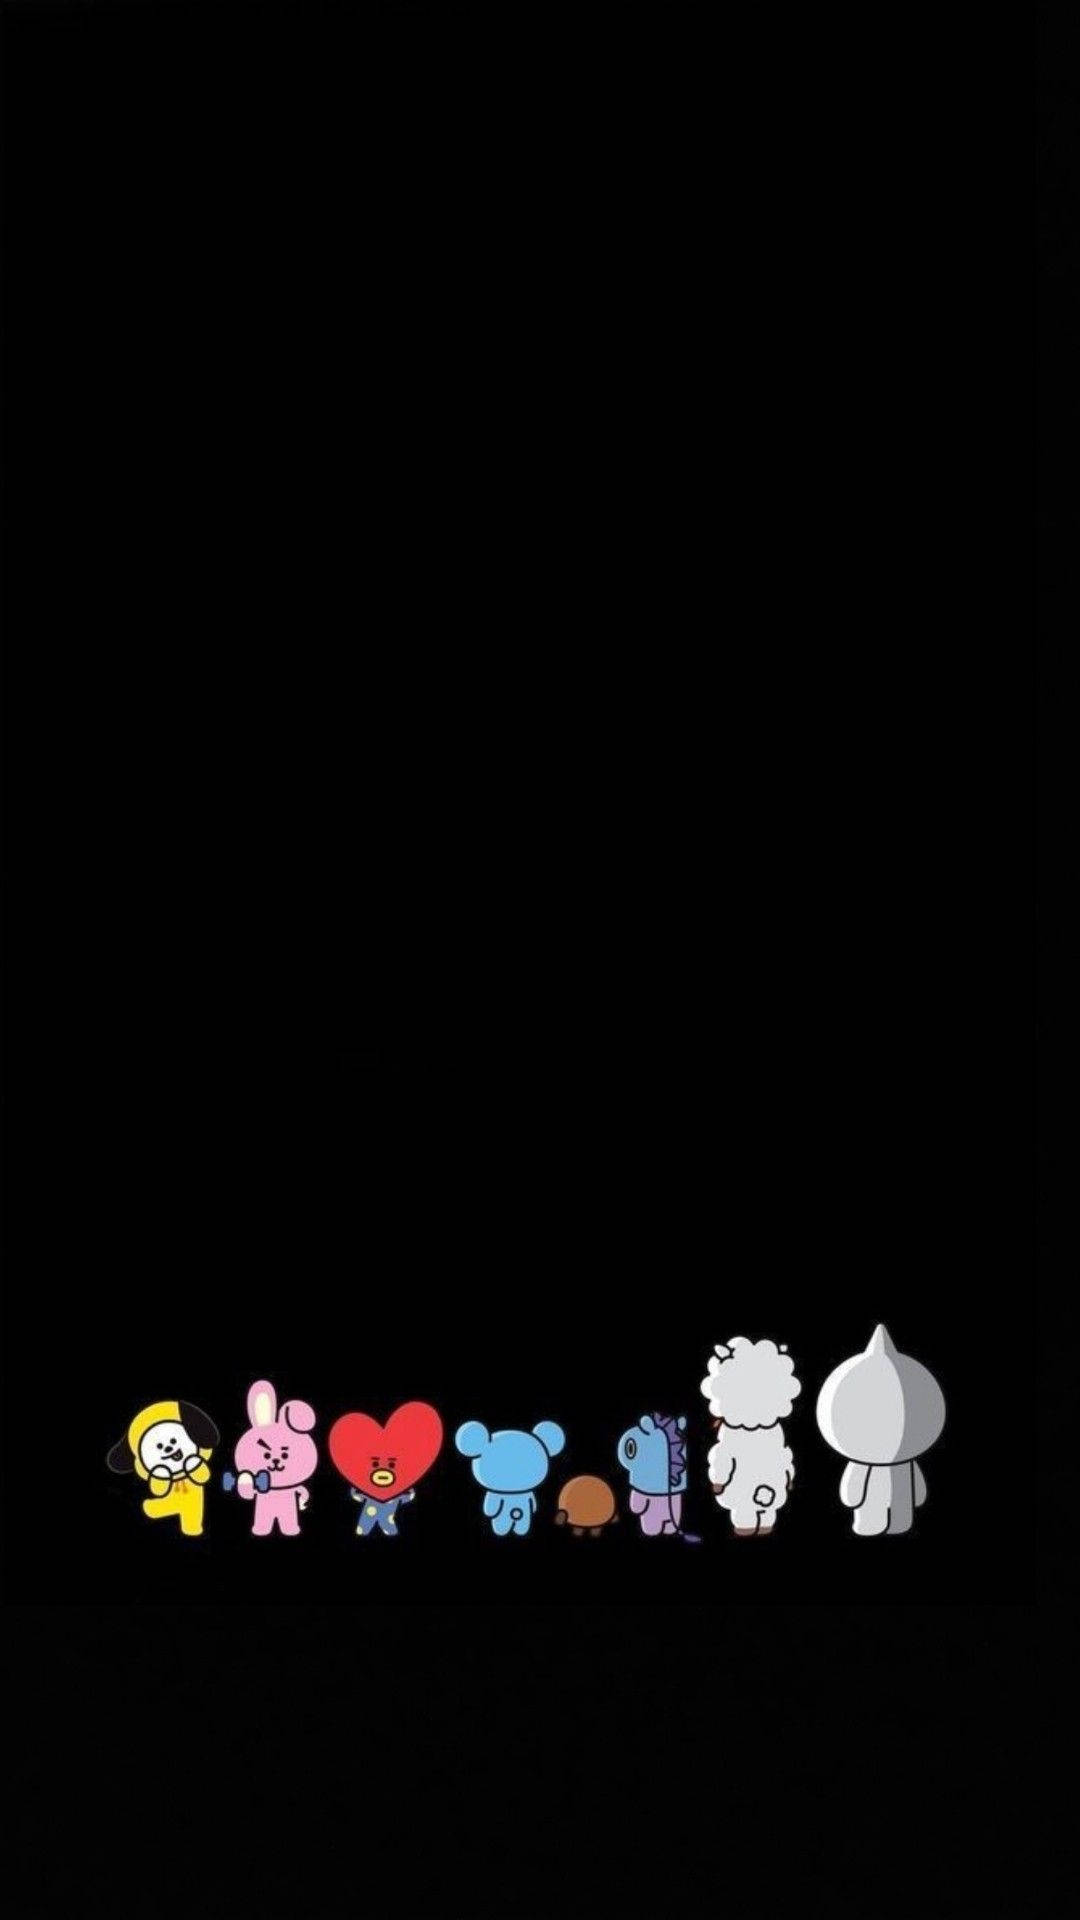 Cute BT21 Characters Lined Up Wallpaper